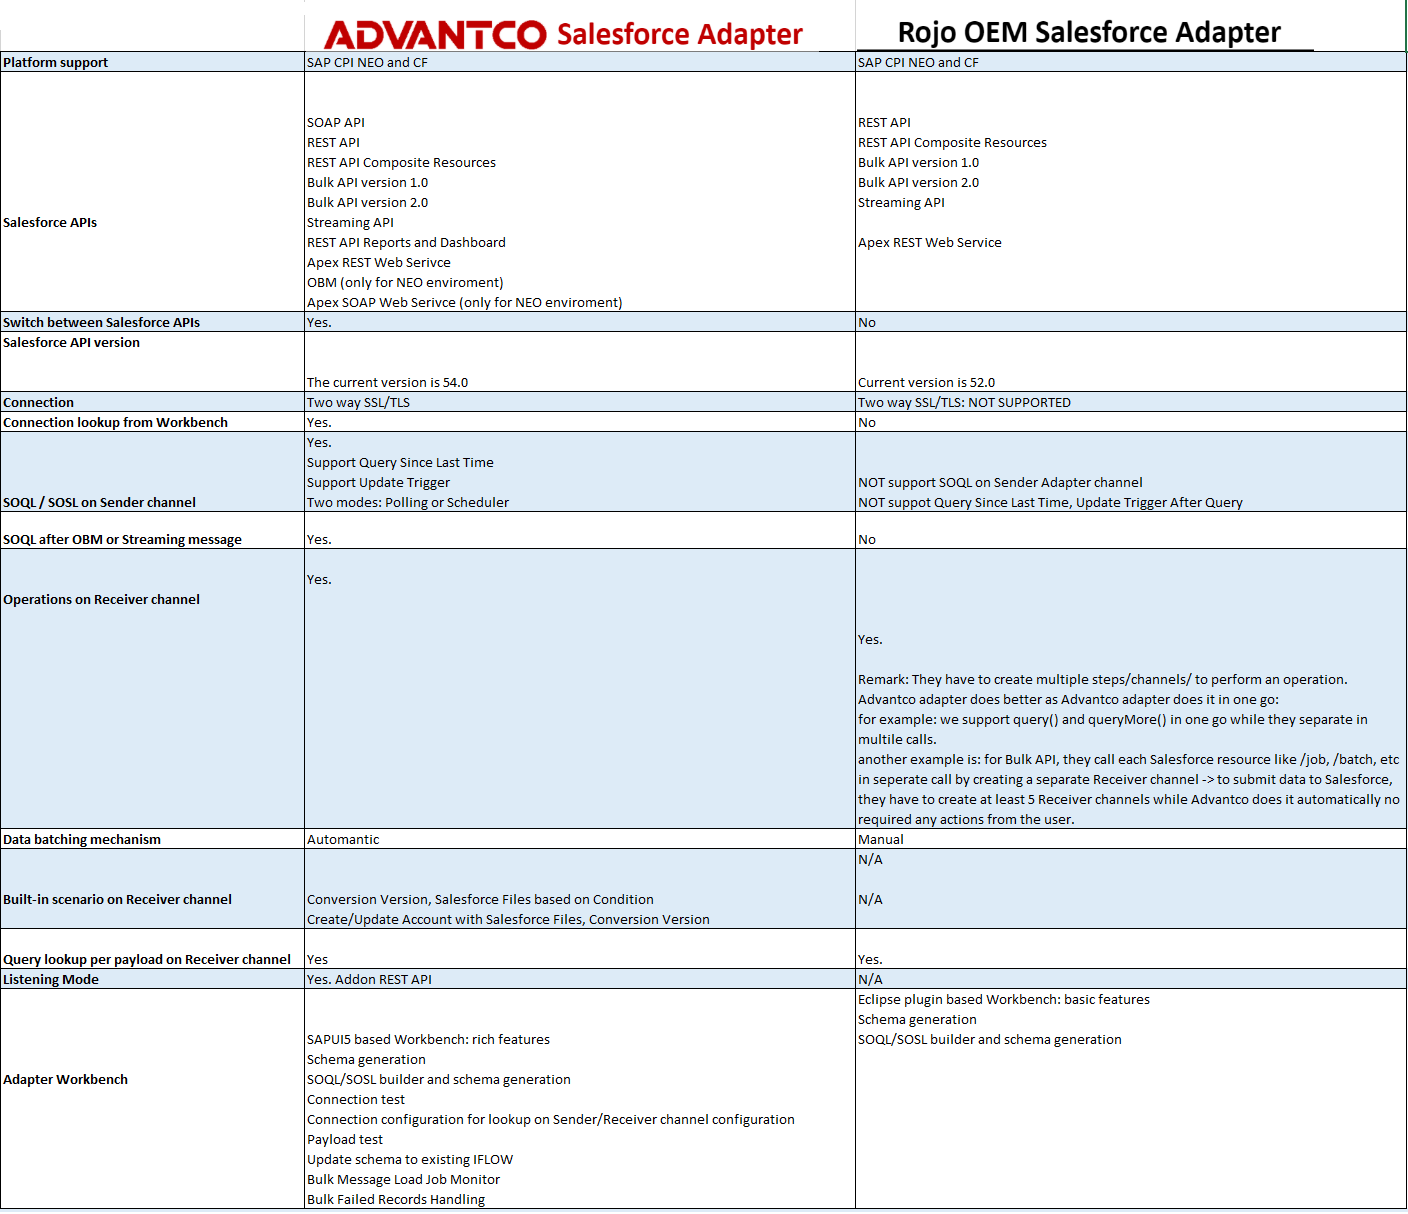 How to Migrate to the Advantco Salesforce Adapter for CPI_Pic1